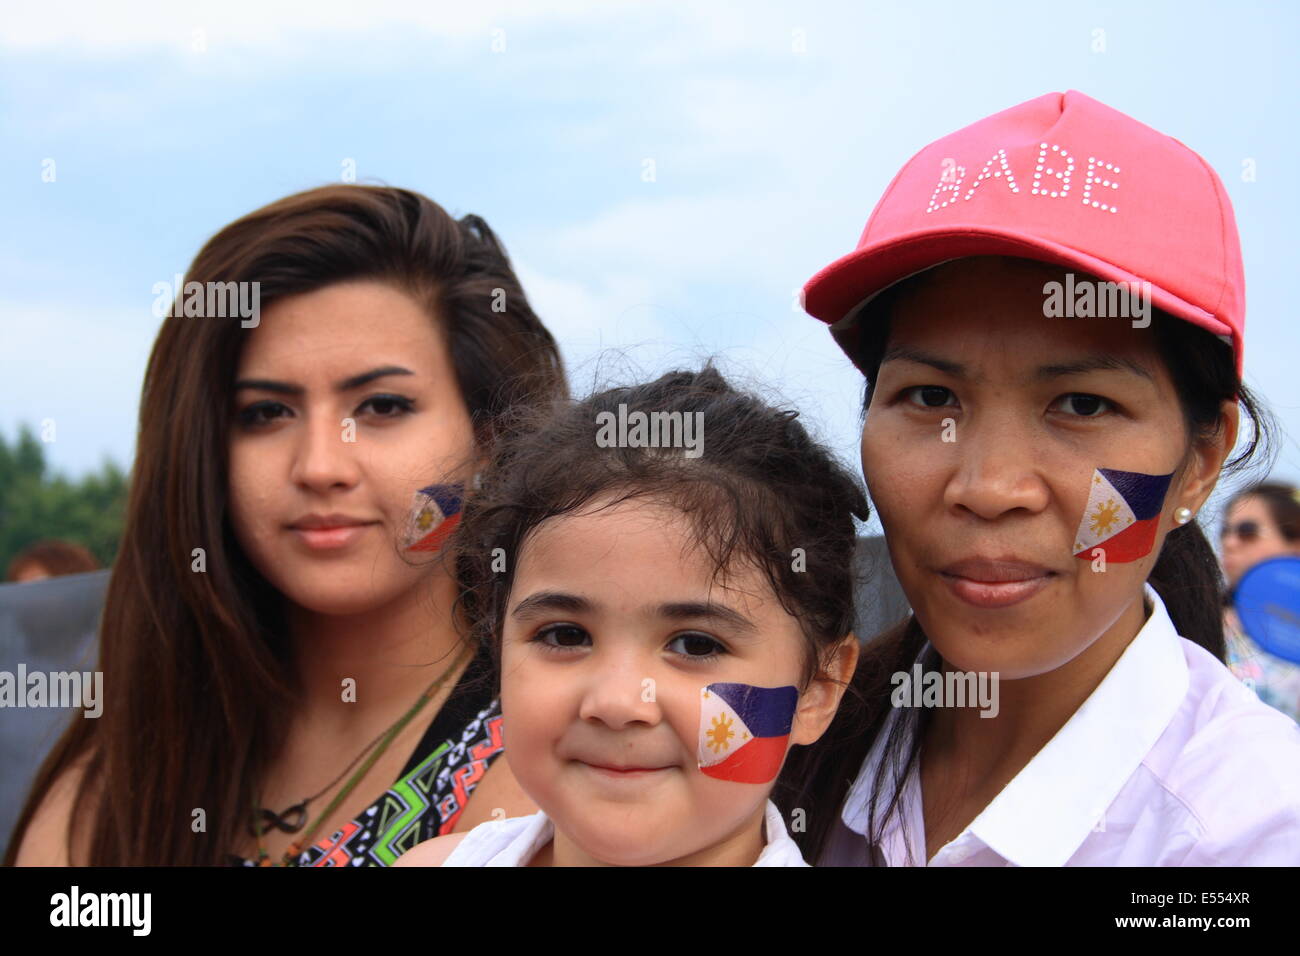 Walton, Surrey, UK. 20th July, 2014. A British Filipino family of a mother and her two daughters enjoying the fiesta having had their faces painted with the philippine flag depicting the sunshine symbol. Credit:  Paul Hamilton/Alamy Live News Stock Photo